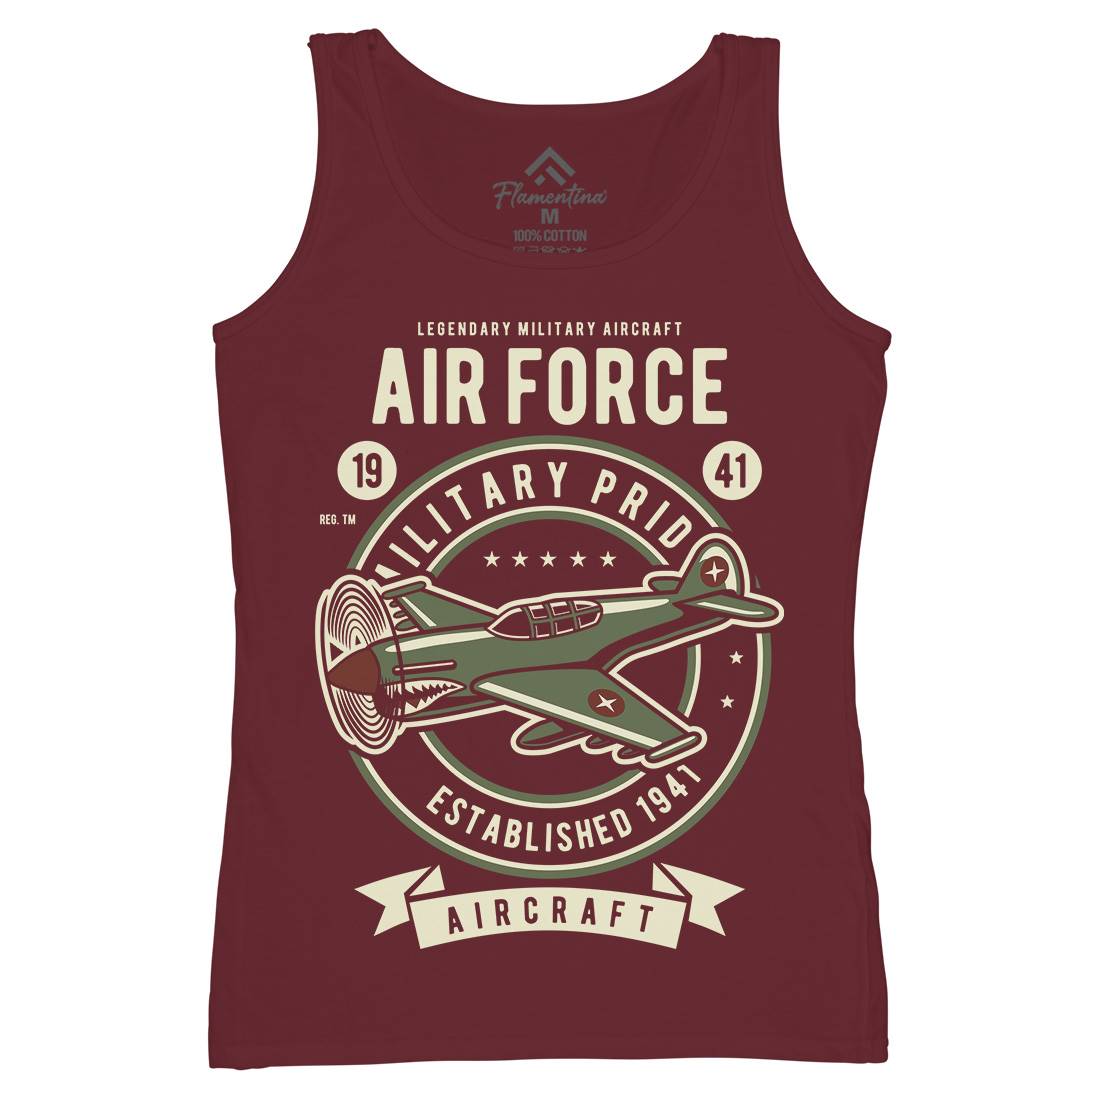 Air Force Womens Organic Tank Top Vest Army D502